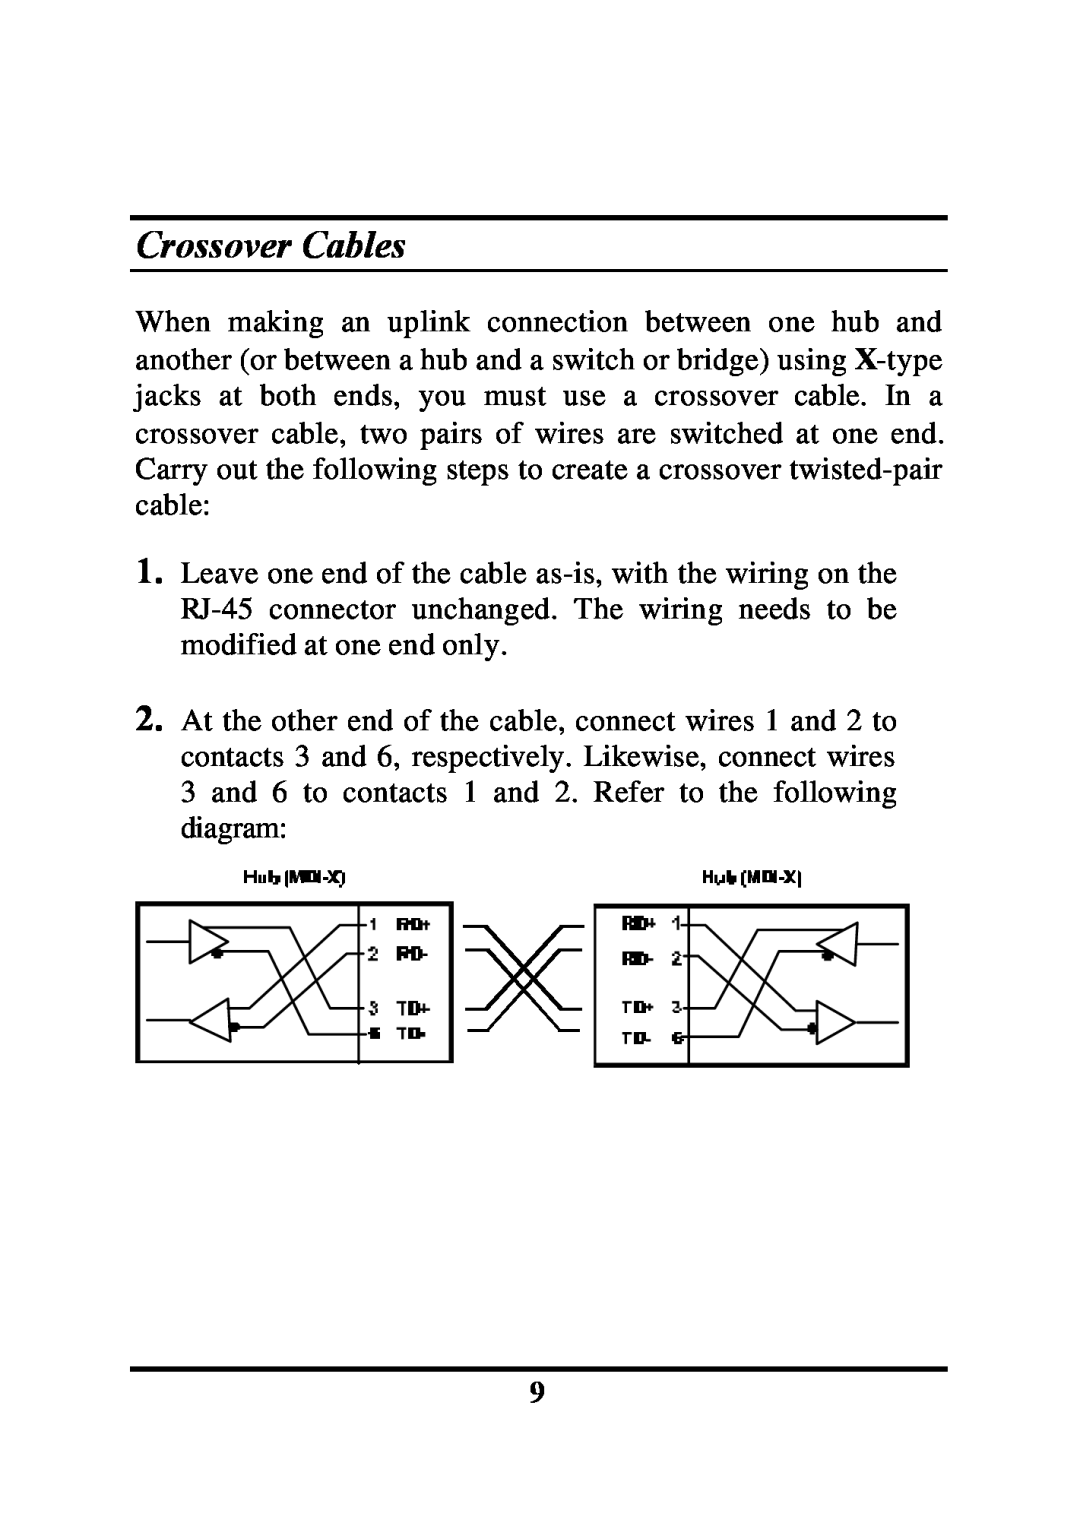 Palm ETHERNET HUB manual Crossover Cables 